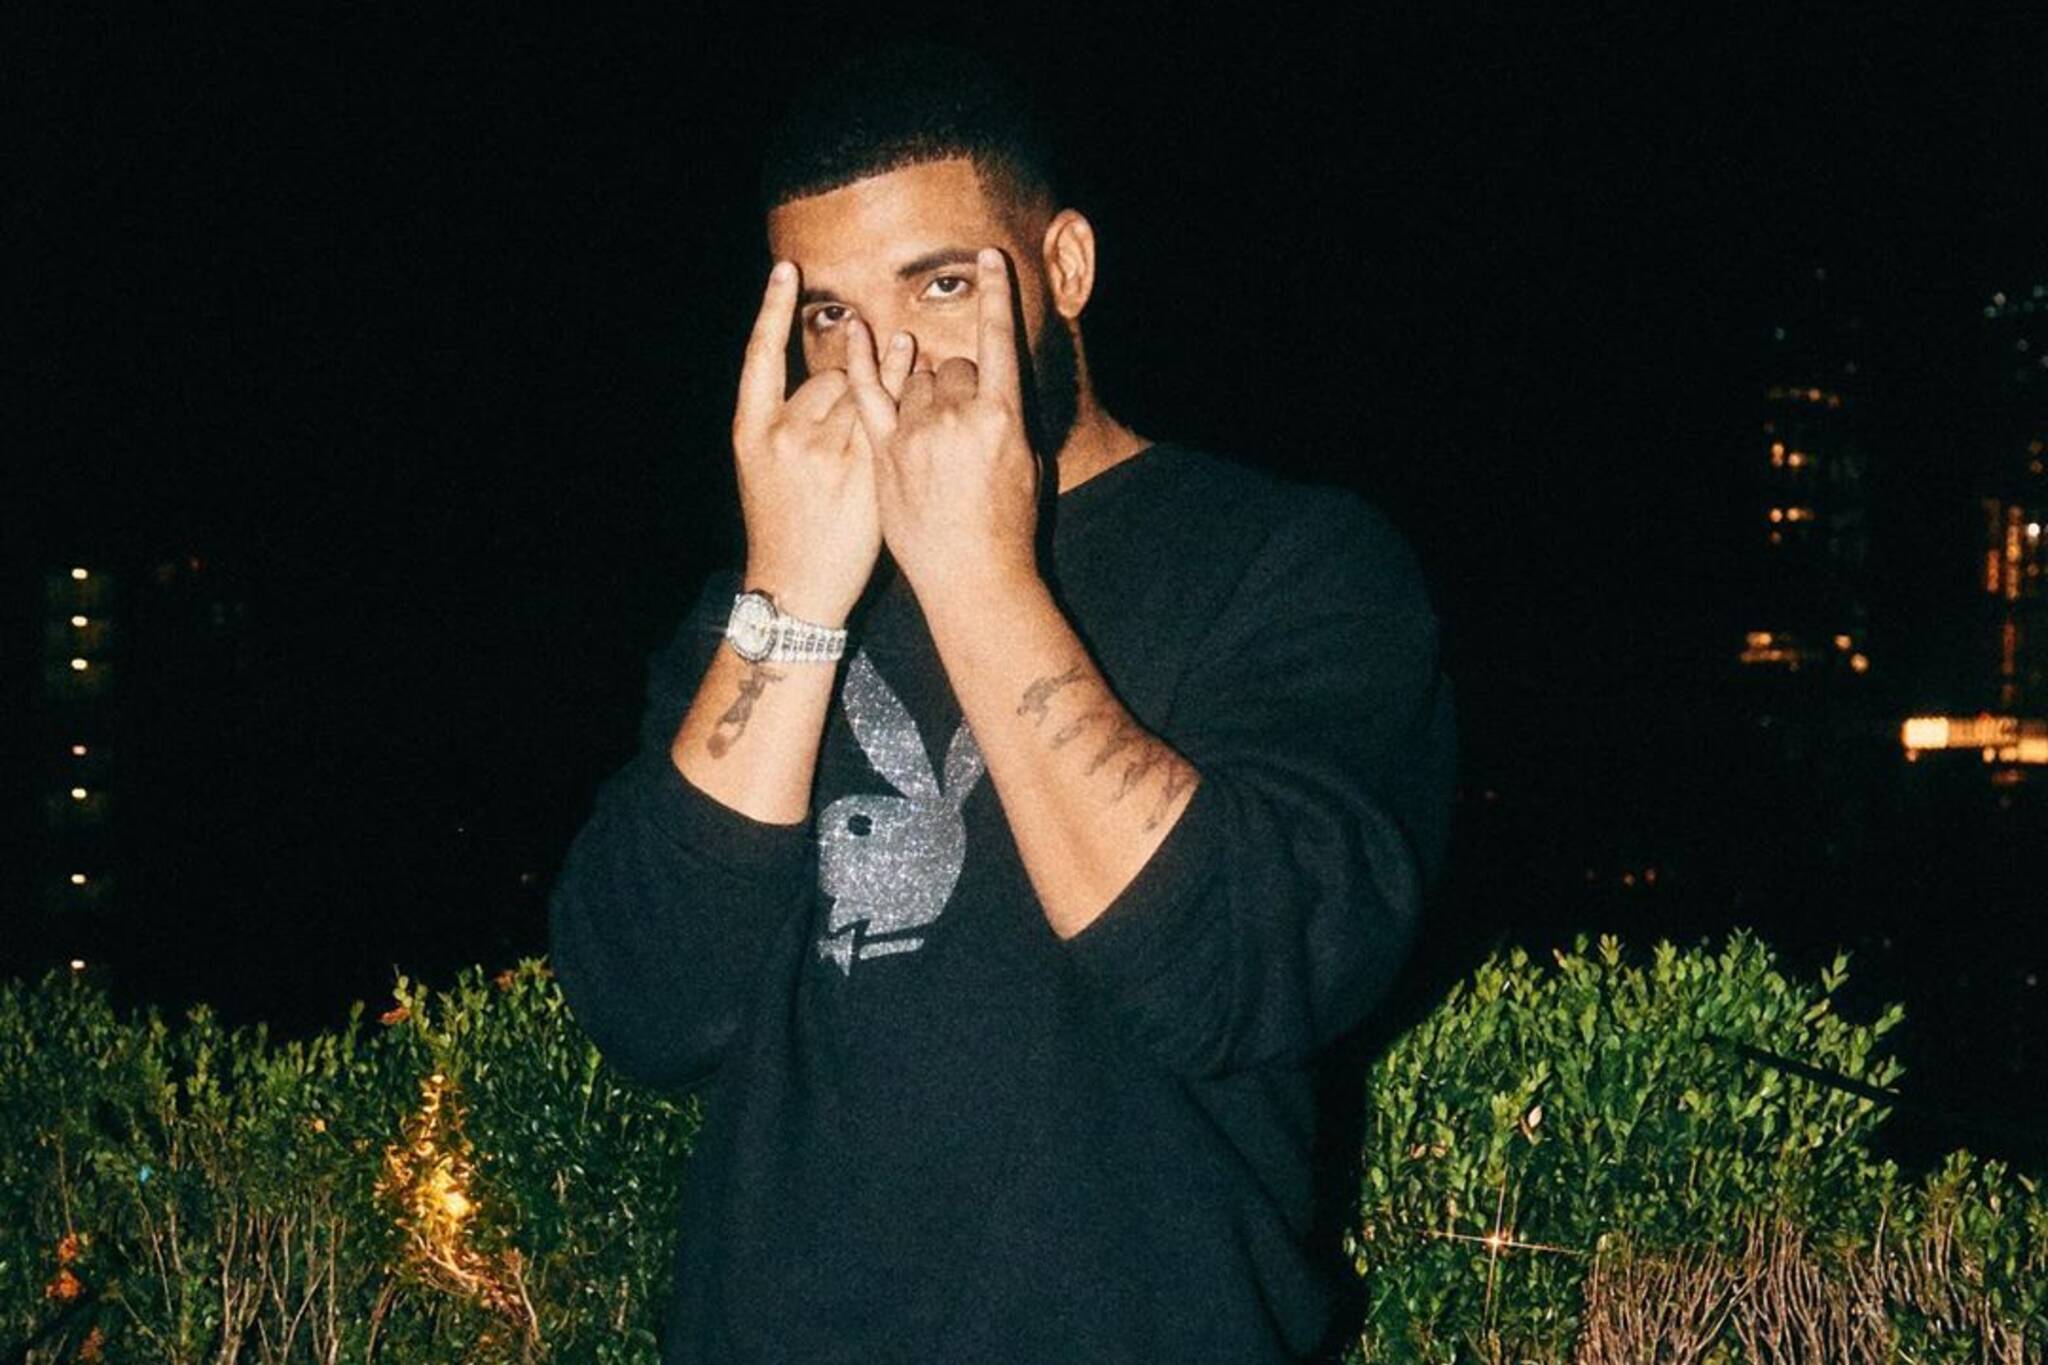 Drake's new tattoo is making some people really mad